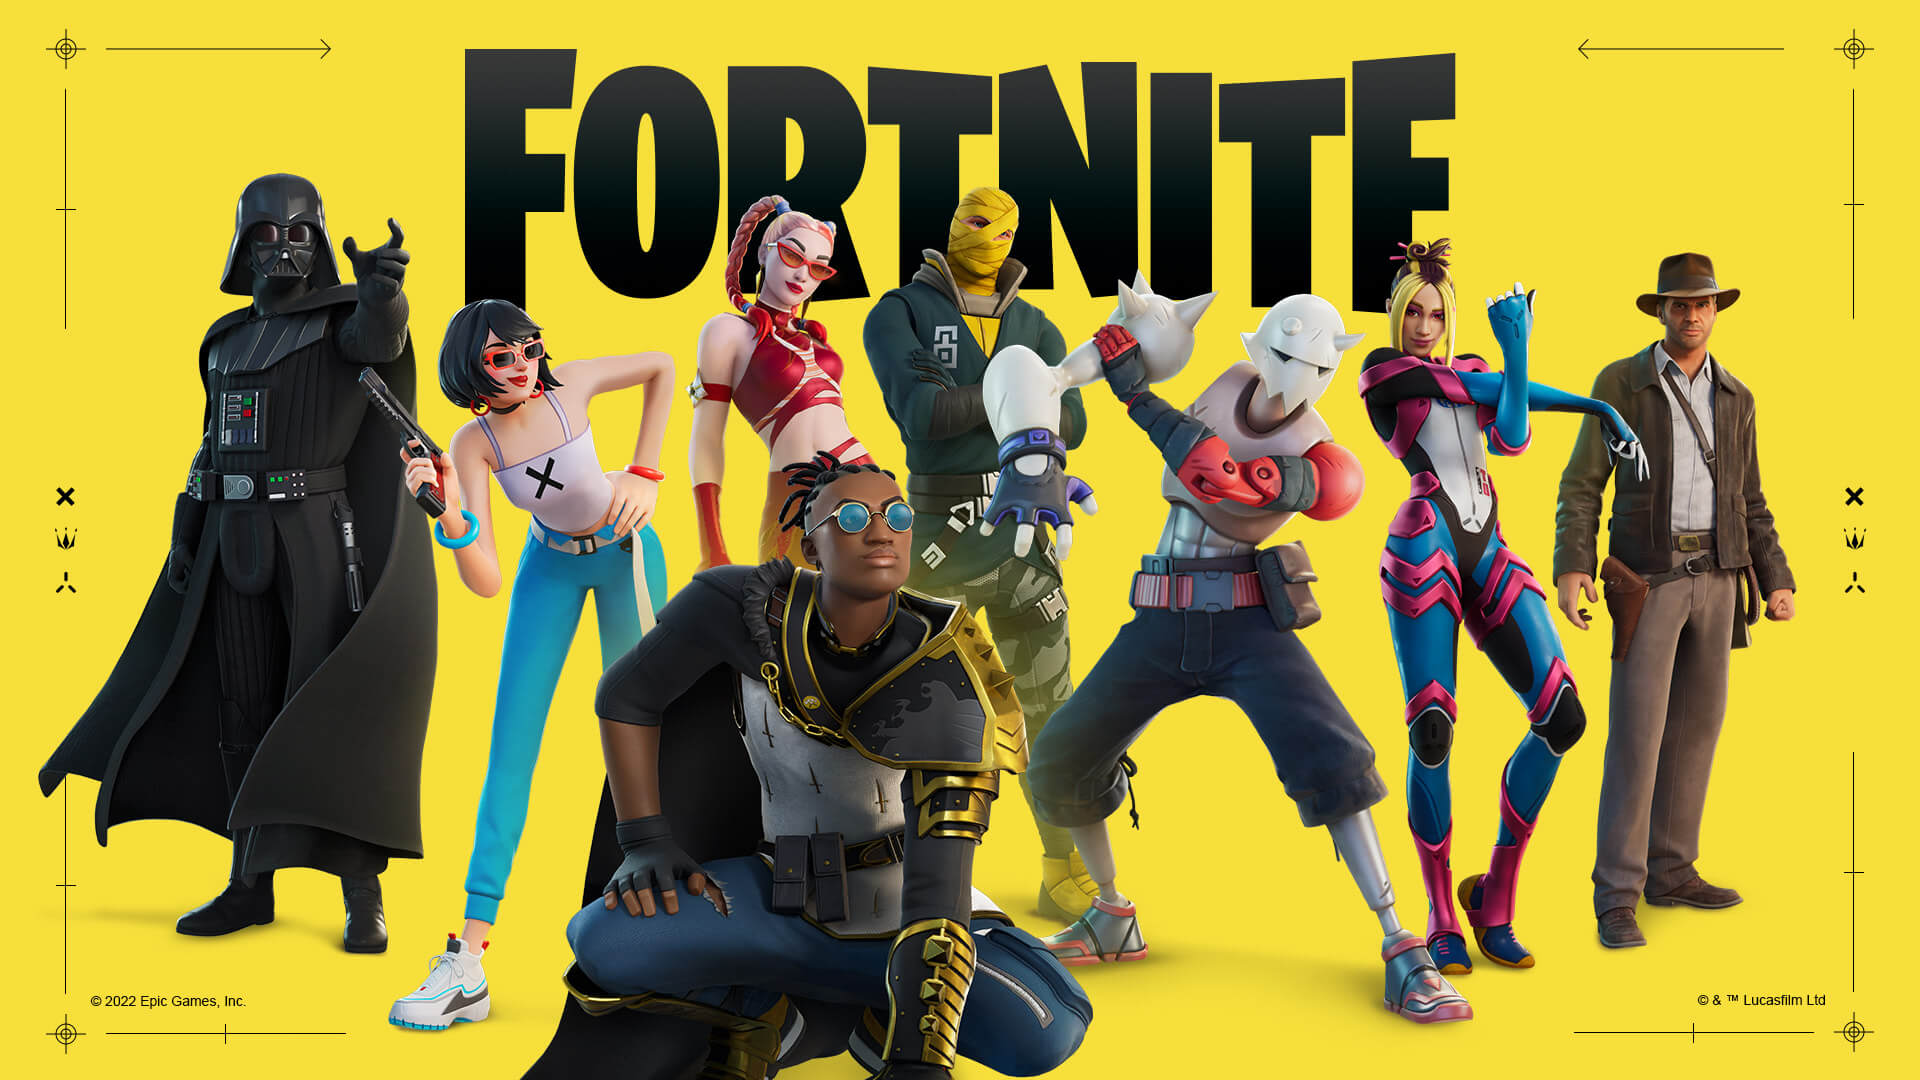 Epic Games CEO teases Fortnite coming back to iOS